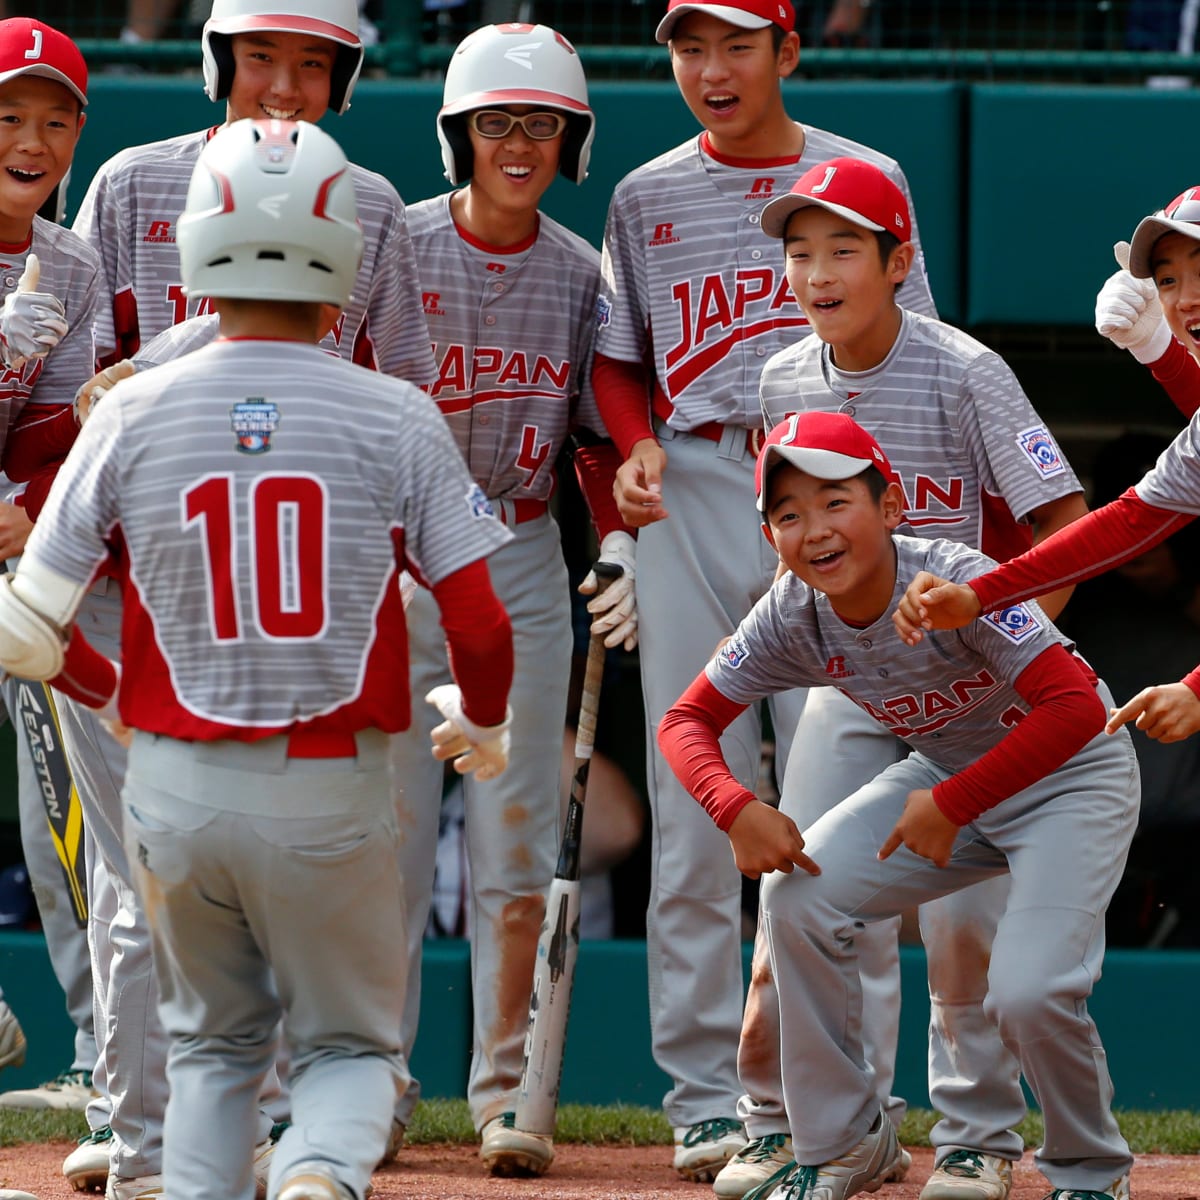 Cuba is in the Little League World Series for the first time. It'll debut  vs Japan on Wednesday